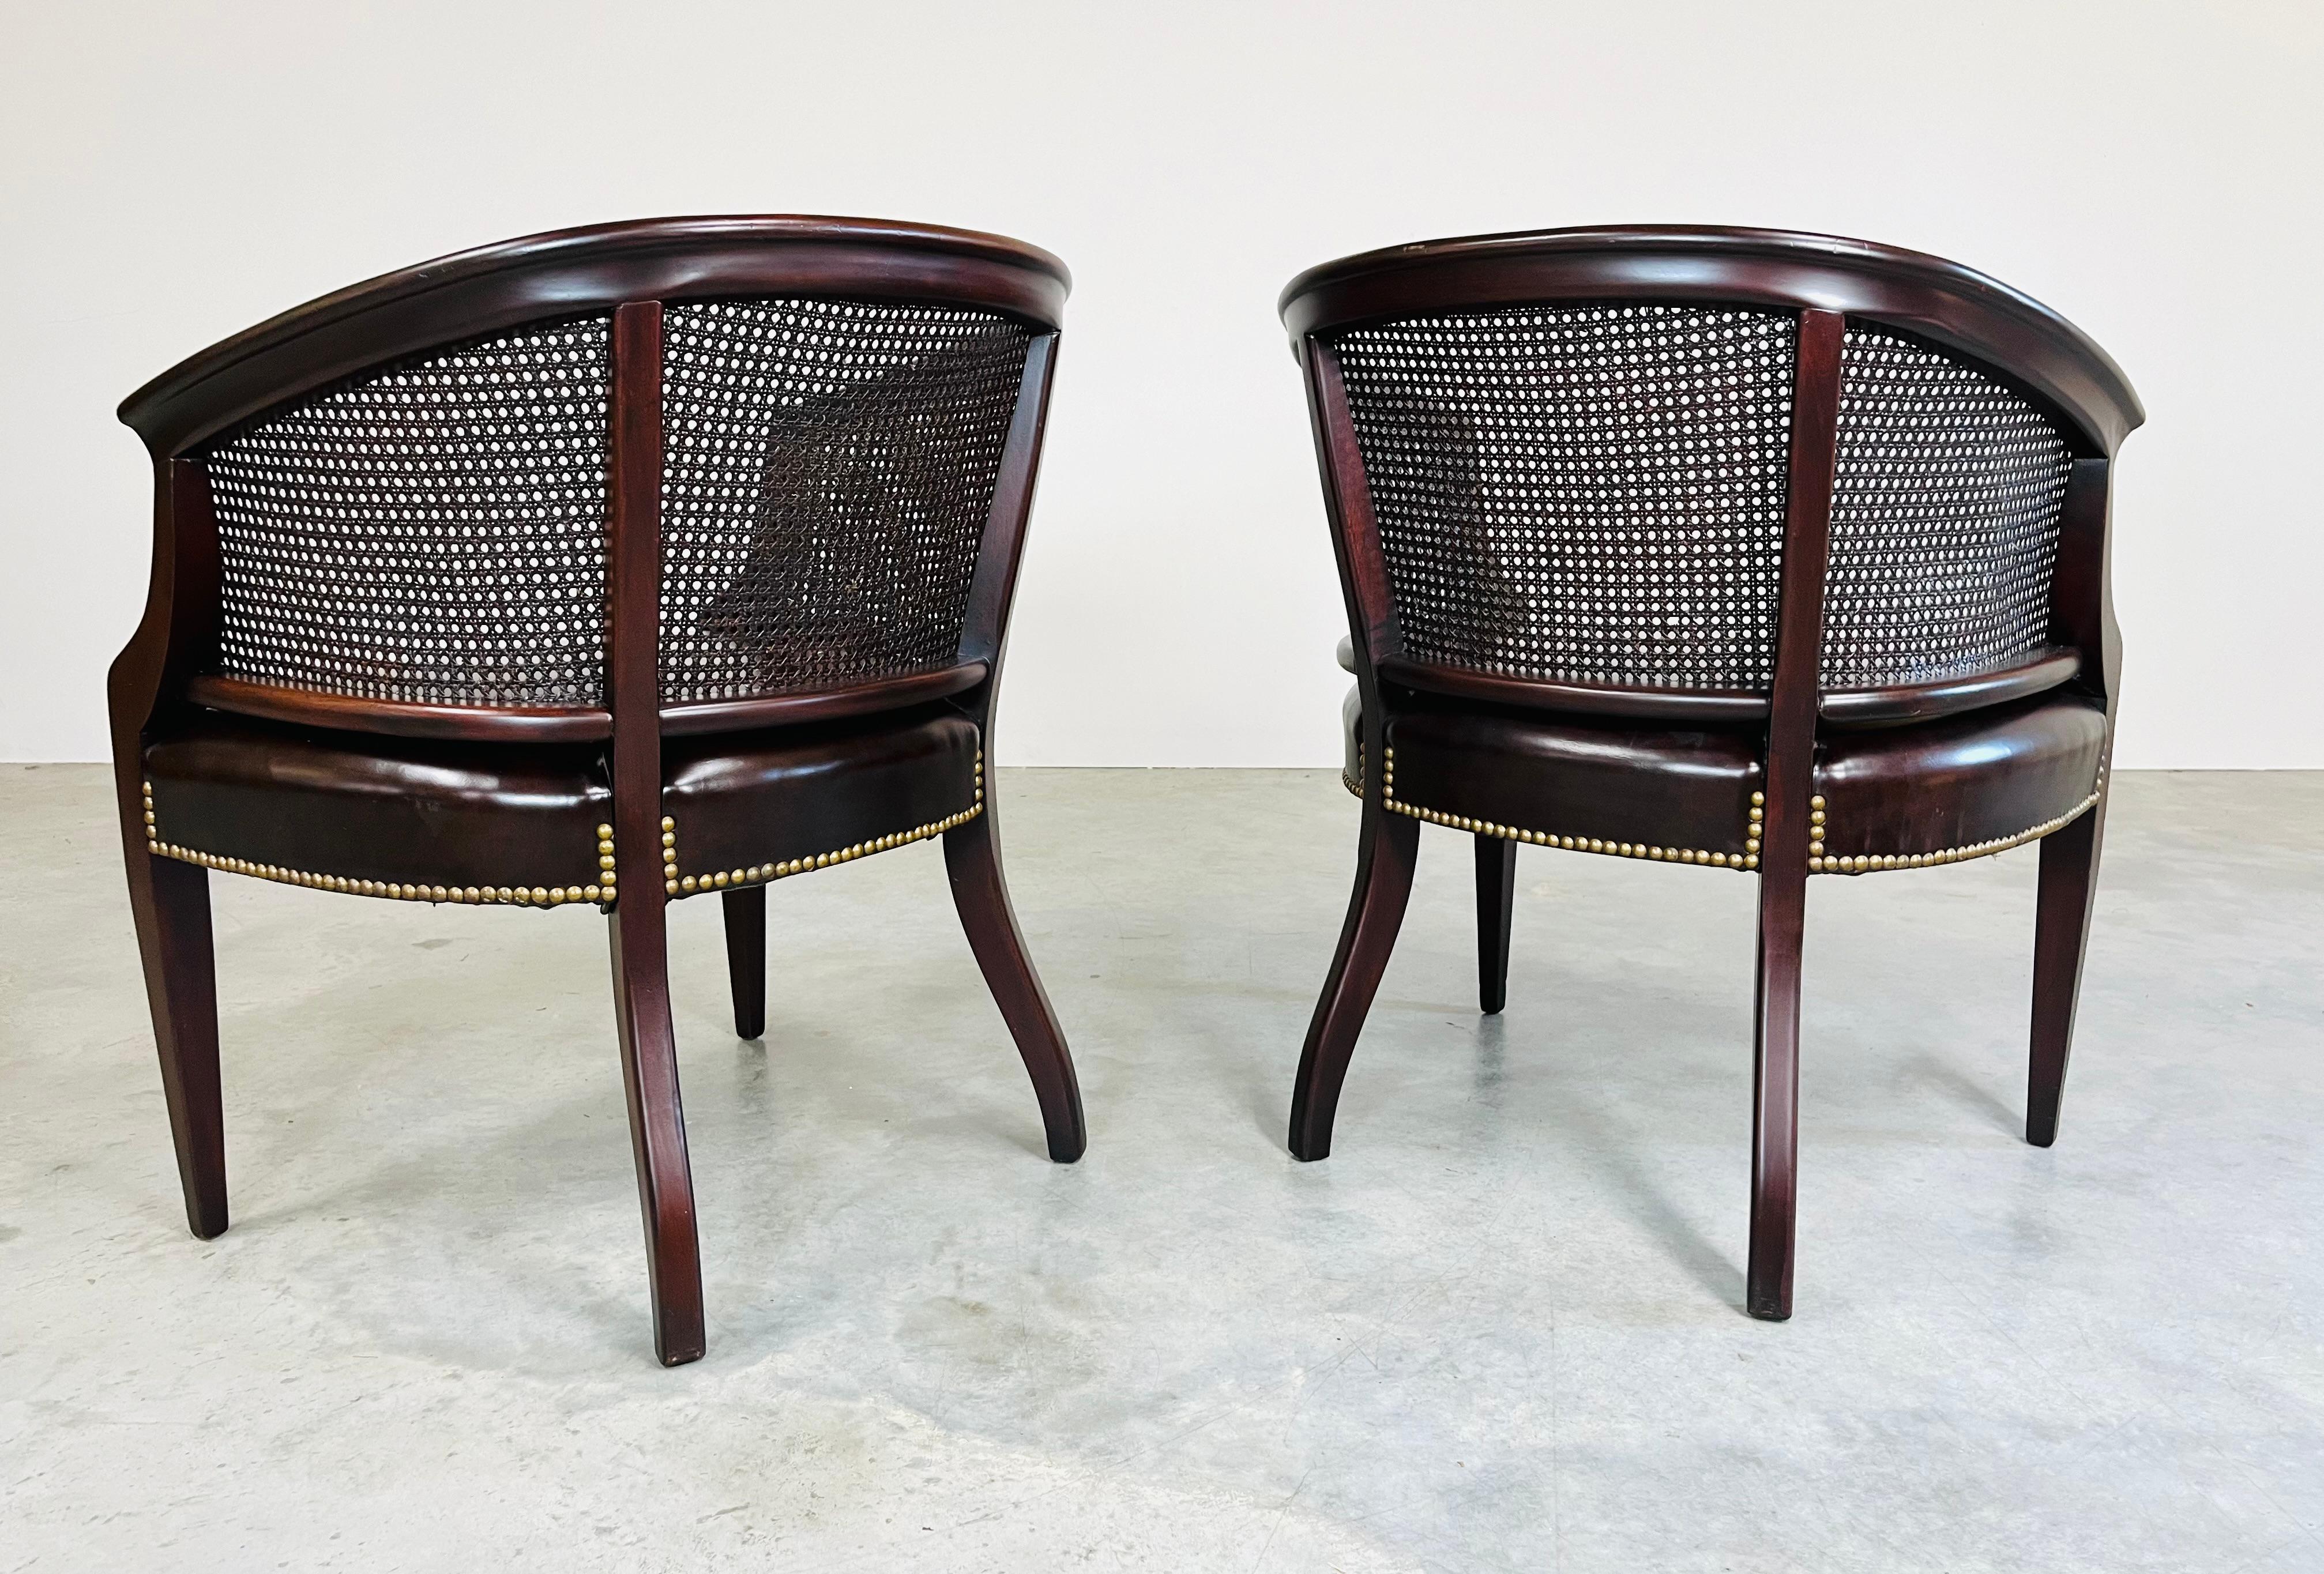 Mid-20th Century Pair of Regency Hickory Chair Co. Cane Barrel Back Club Chairs Having Lithe Legs For Sale